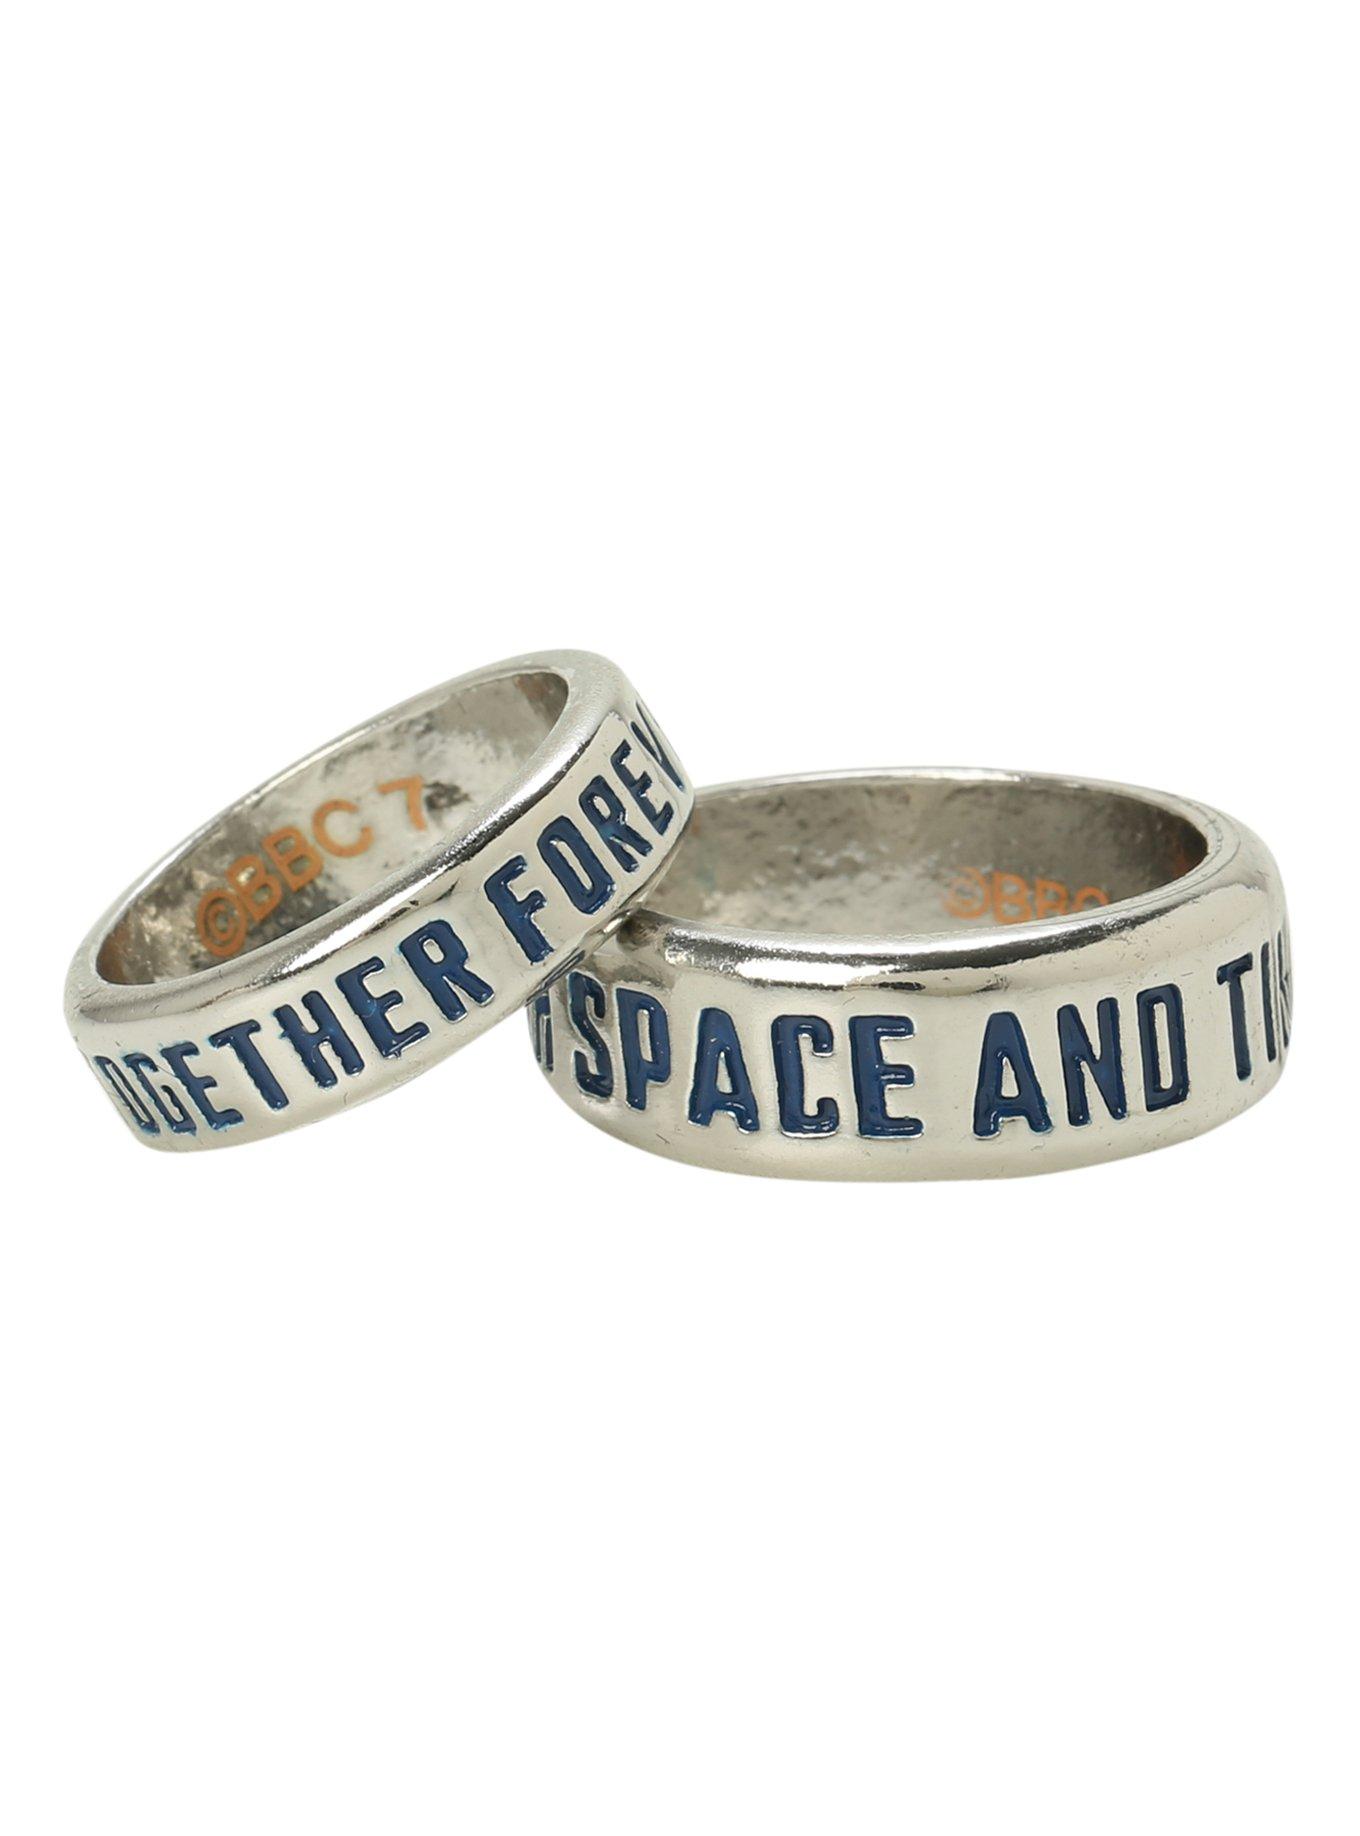 doctor who wedding ring